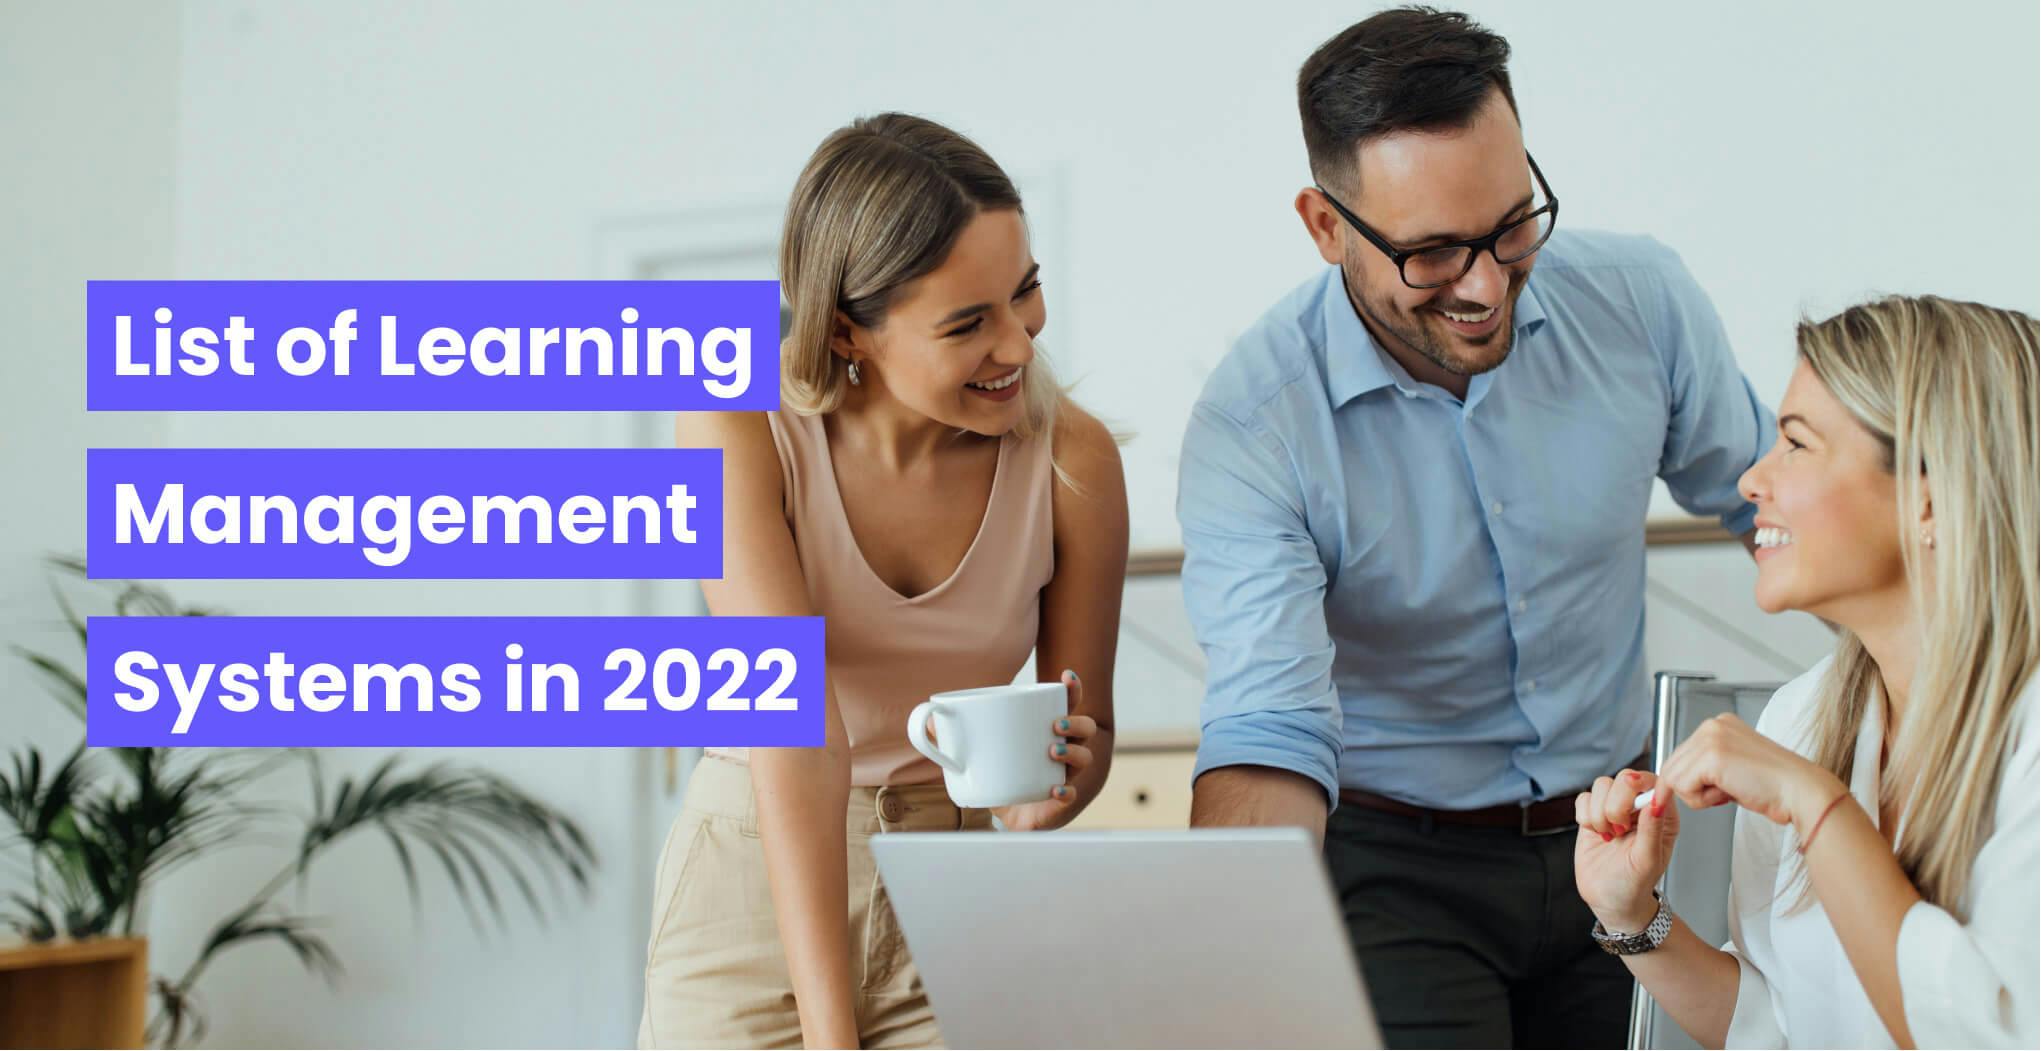 List of Learning Management Systems in 2022